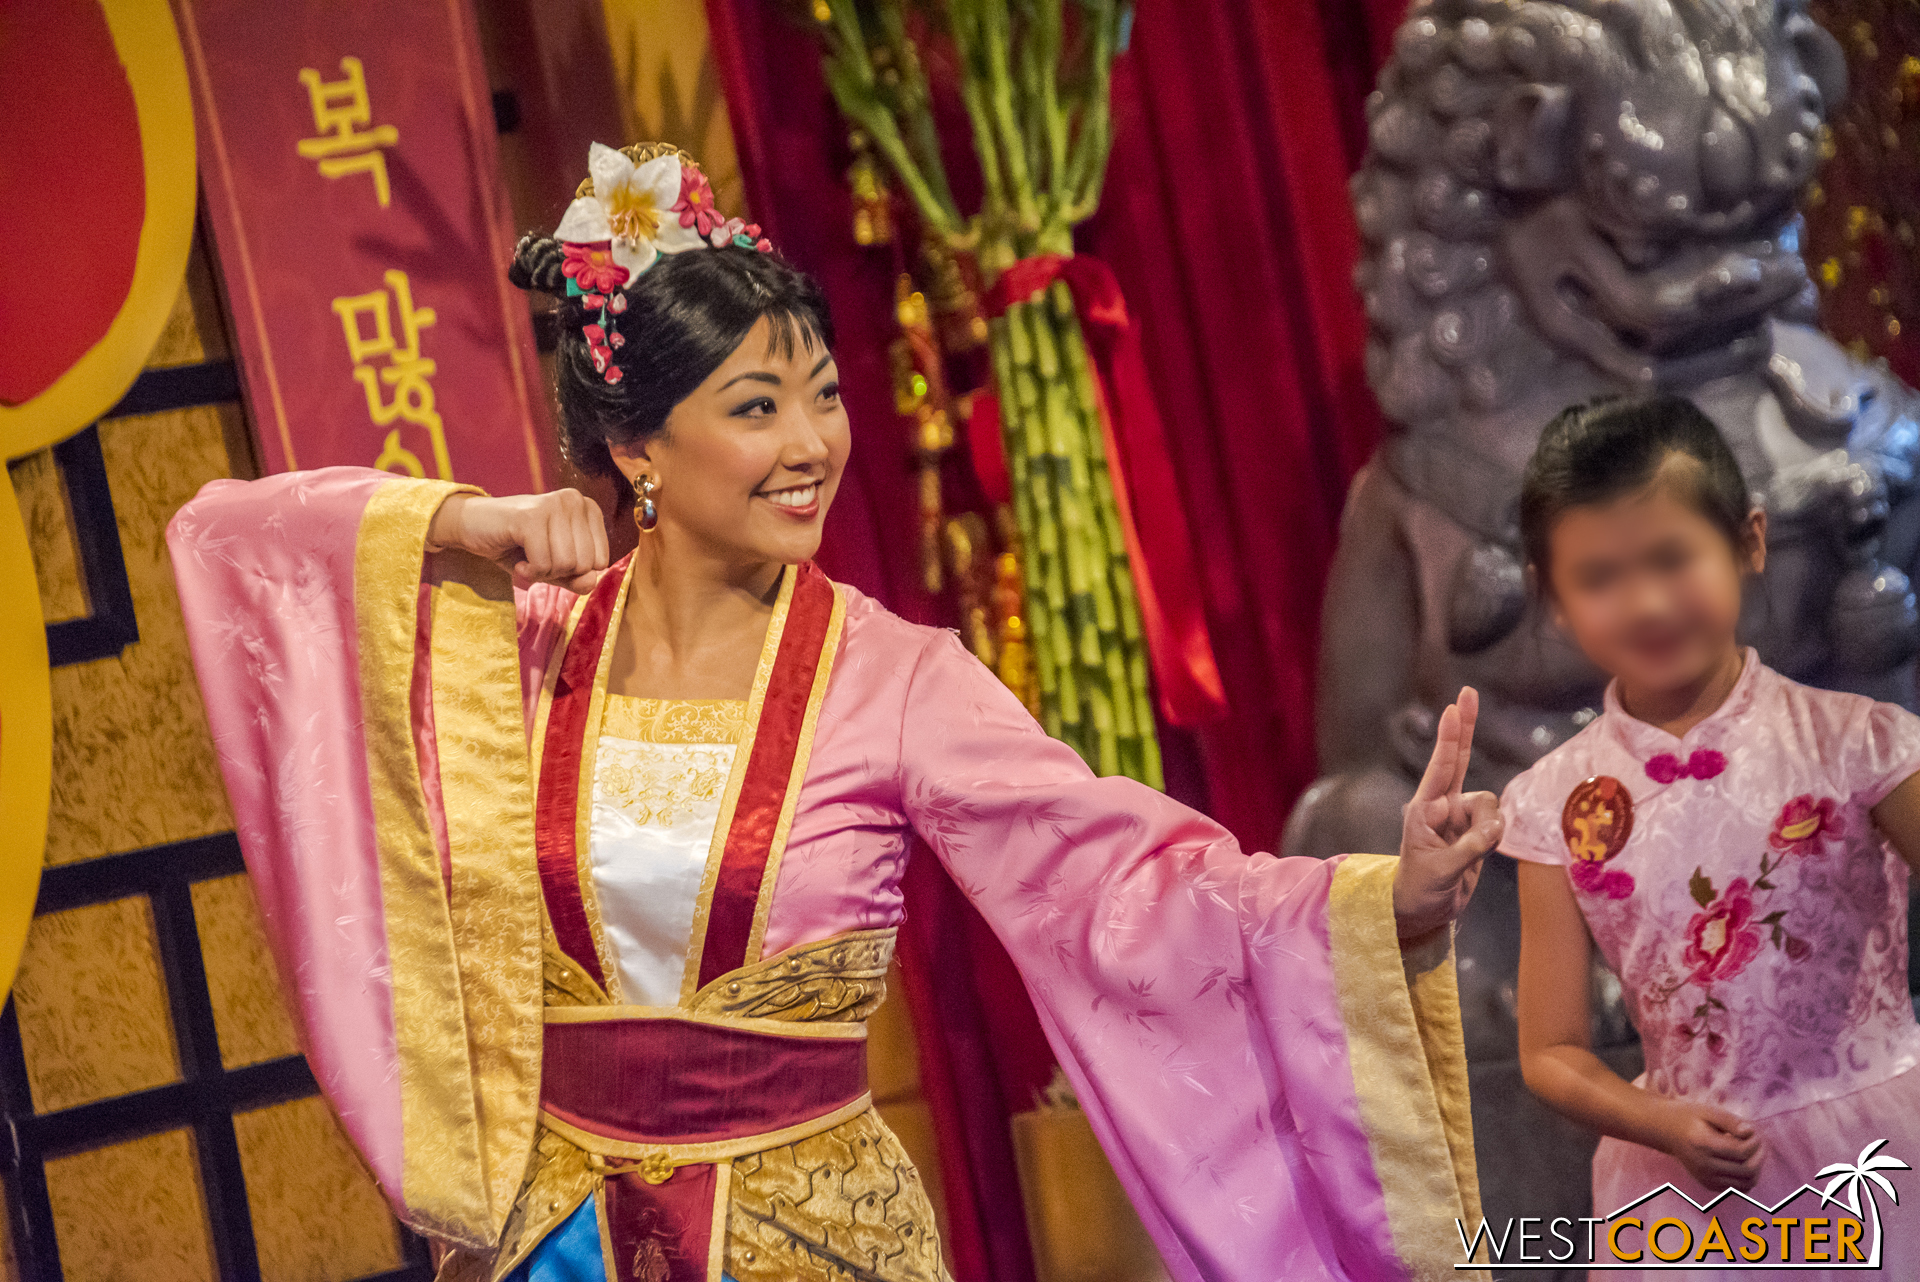  I might be biased, but it's always great to see Mulan out and about in the parks. 